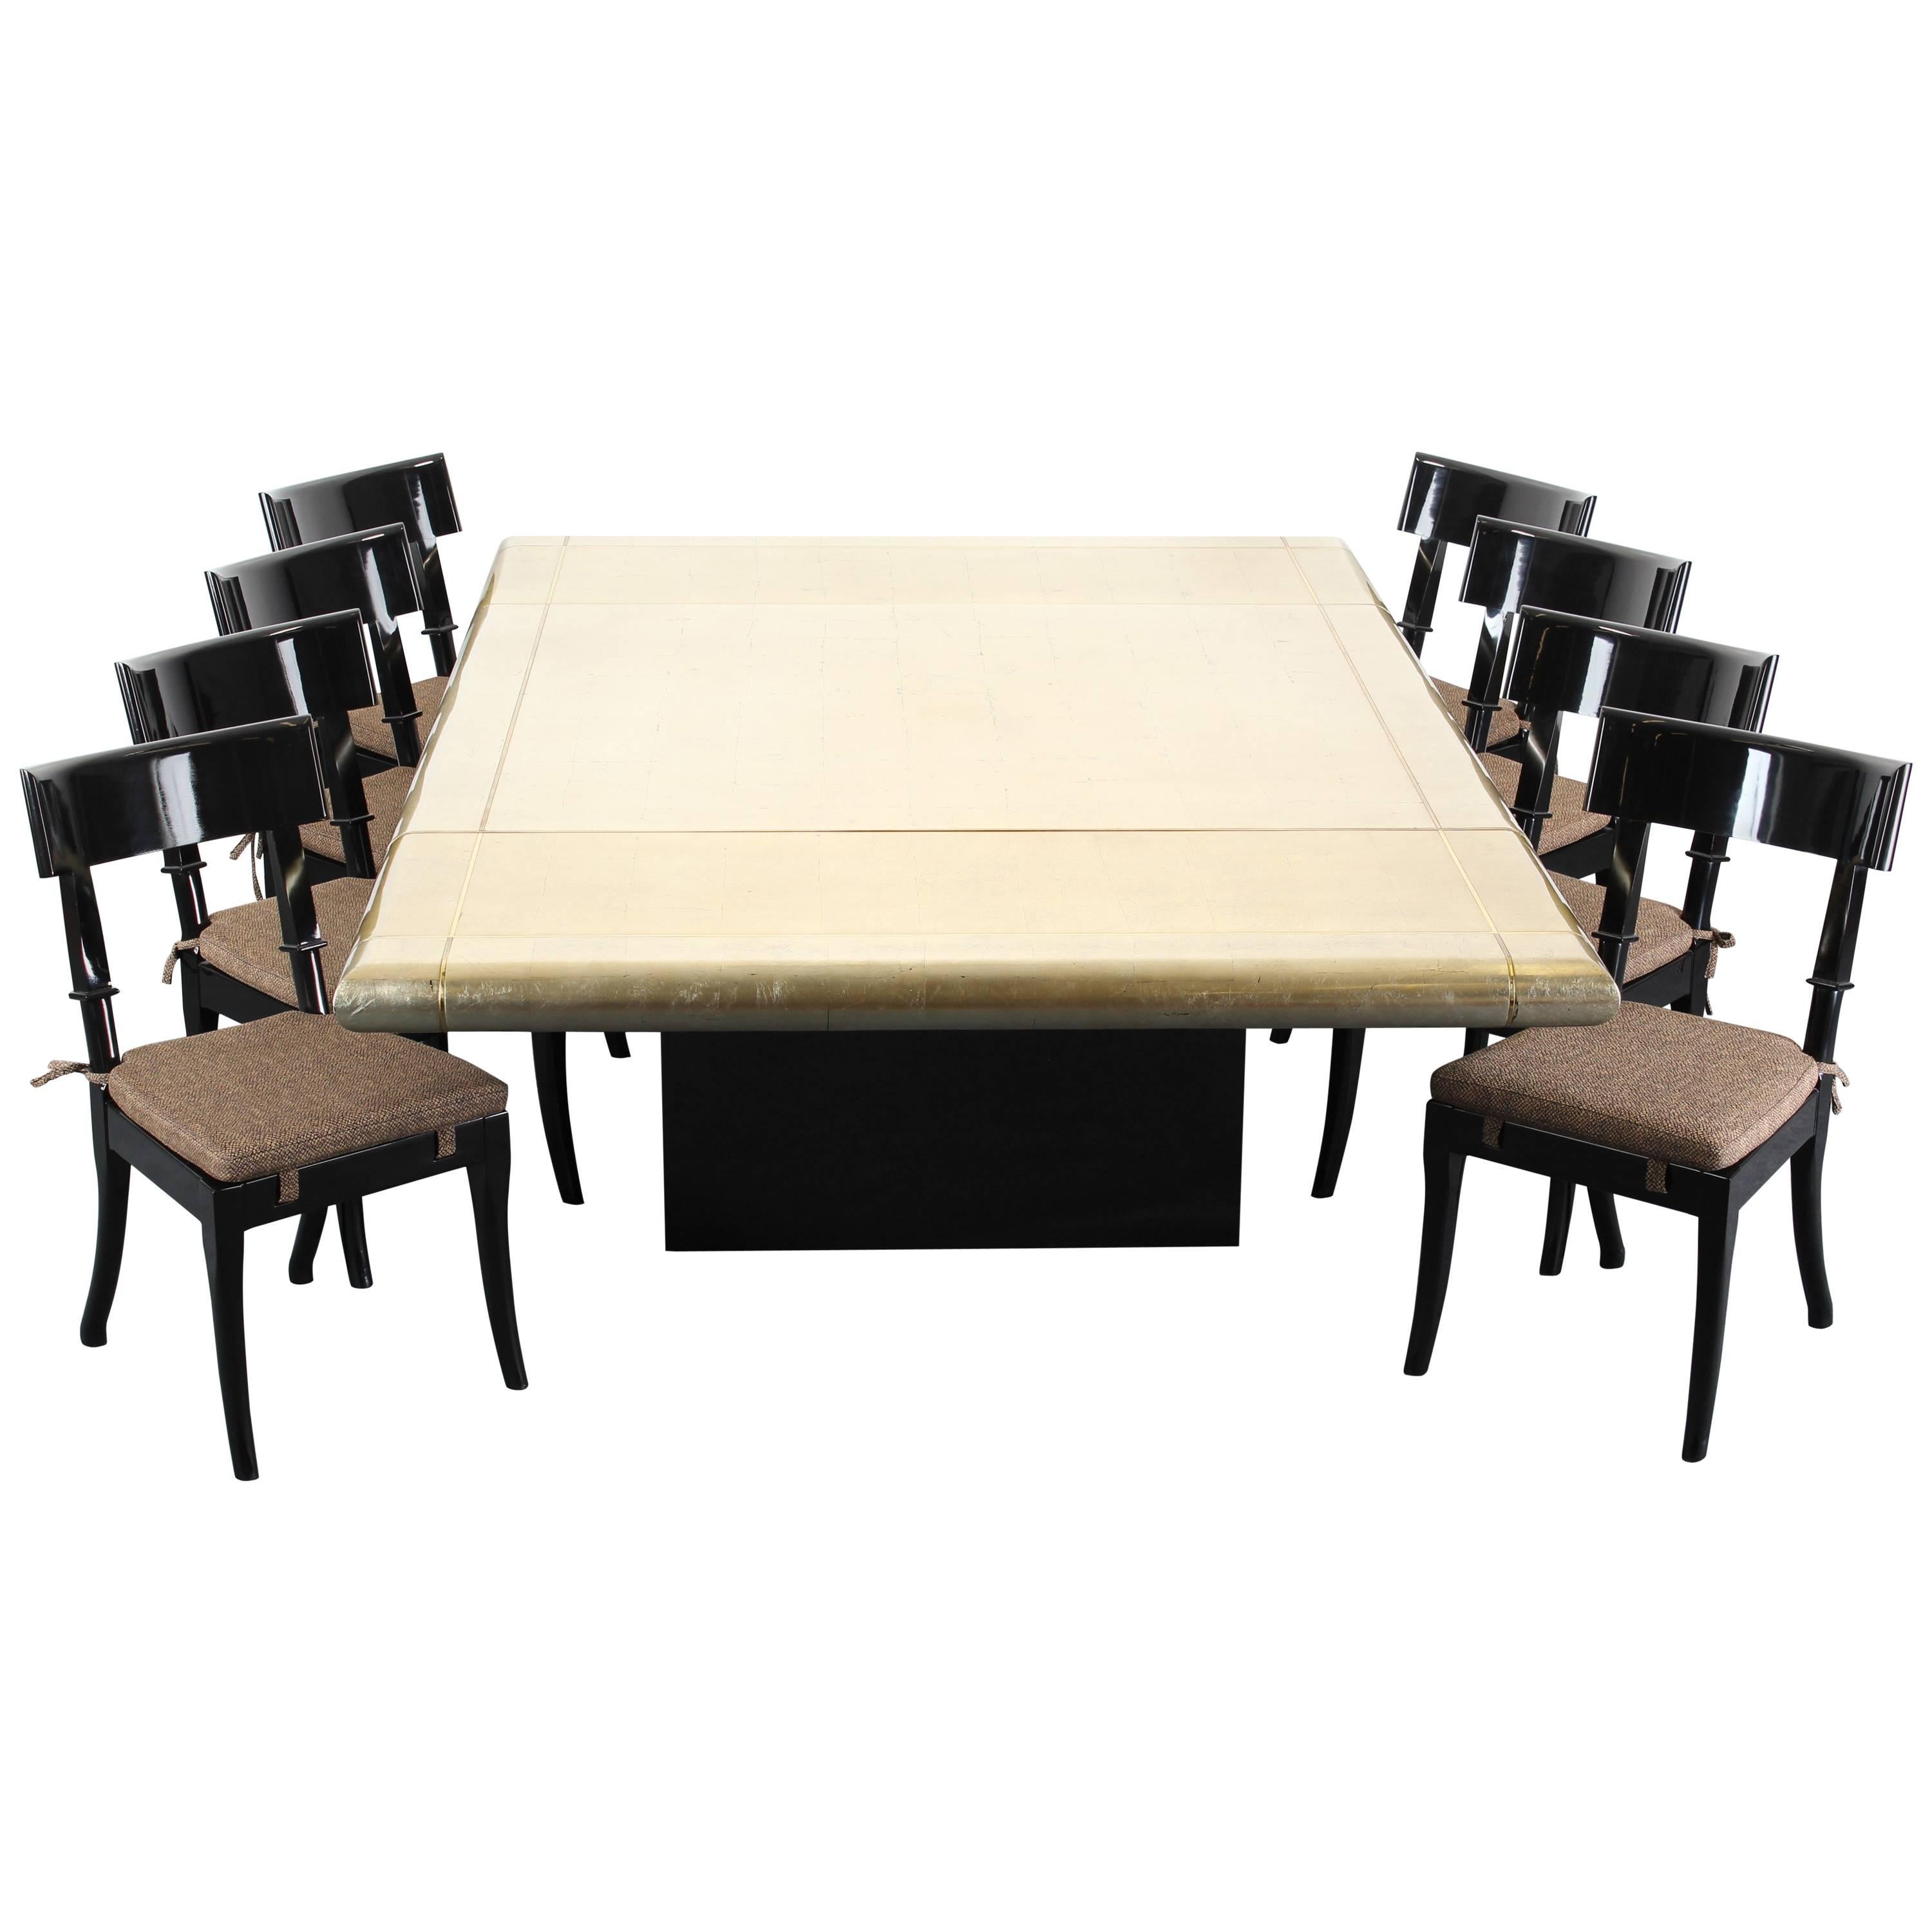 A fabulous custom-made gold leaf and black lacquered dining table on casters with two leaves which seats 10-12 people. The table and leaves have an inlaid bronze border. The top is lacquered with hand-applied gold leaf squares. Very good condition